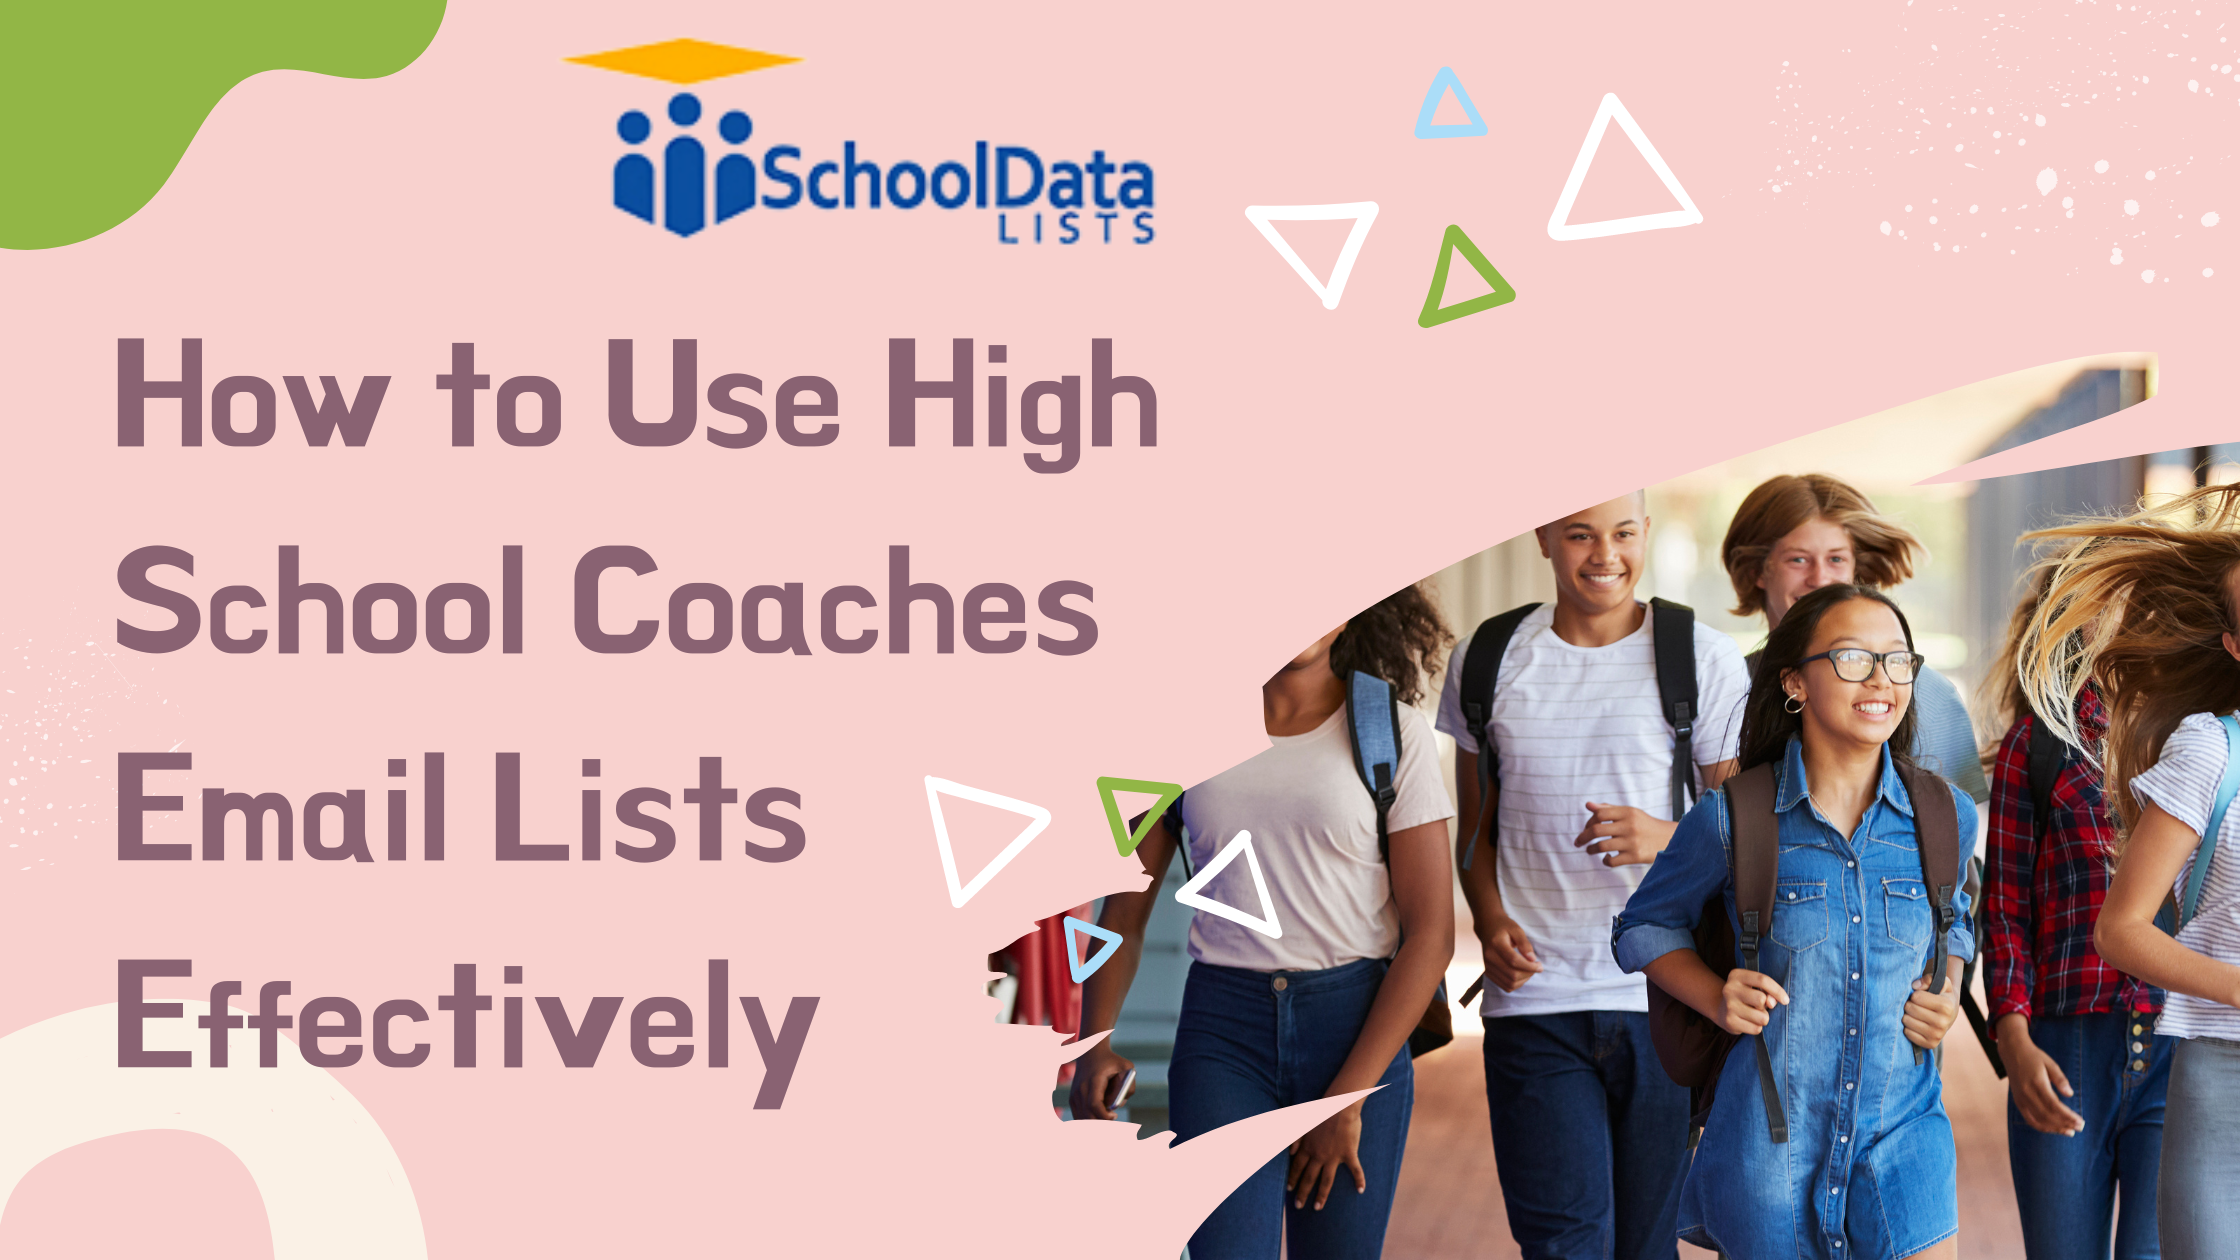 How to Use High School Coaches Email Lists Effectively